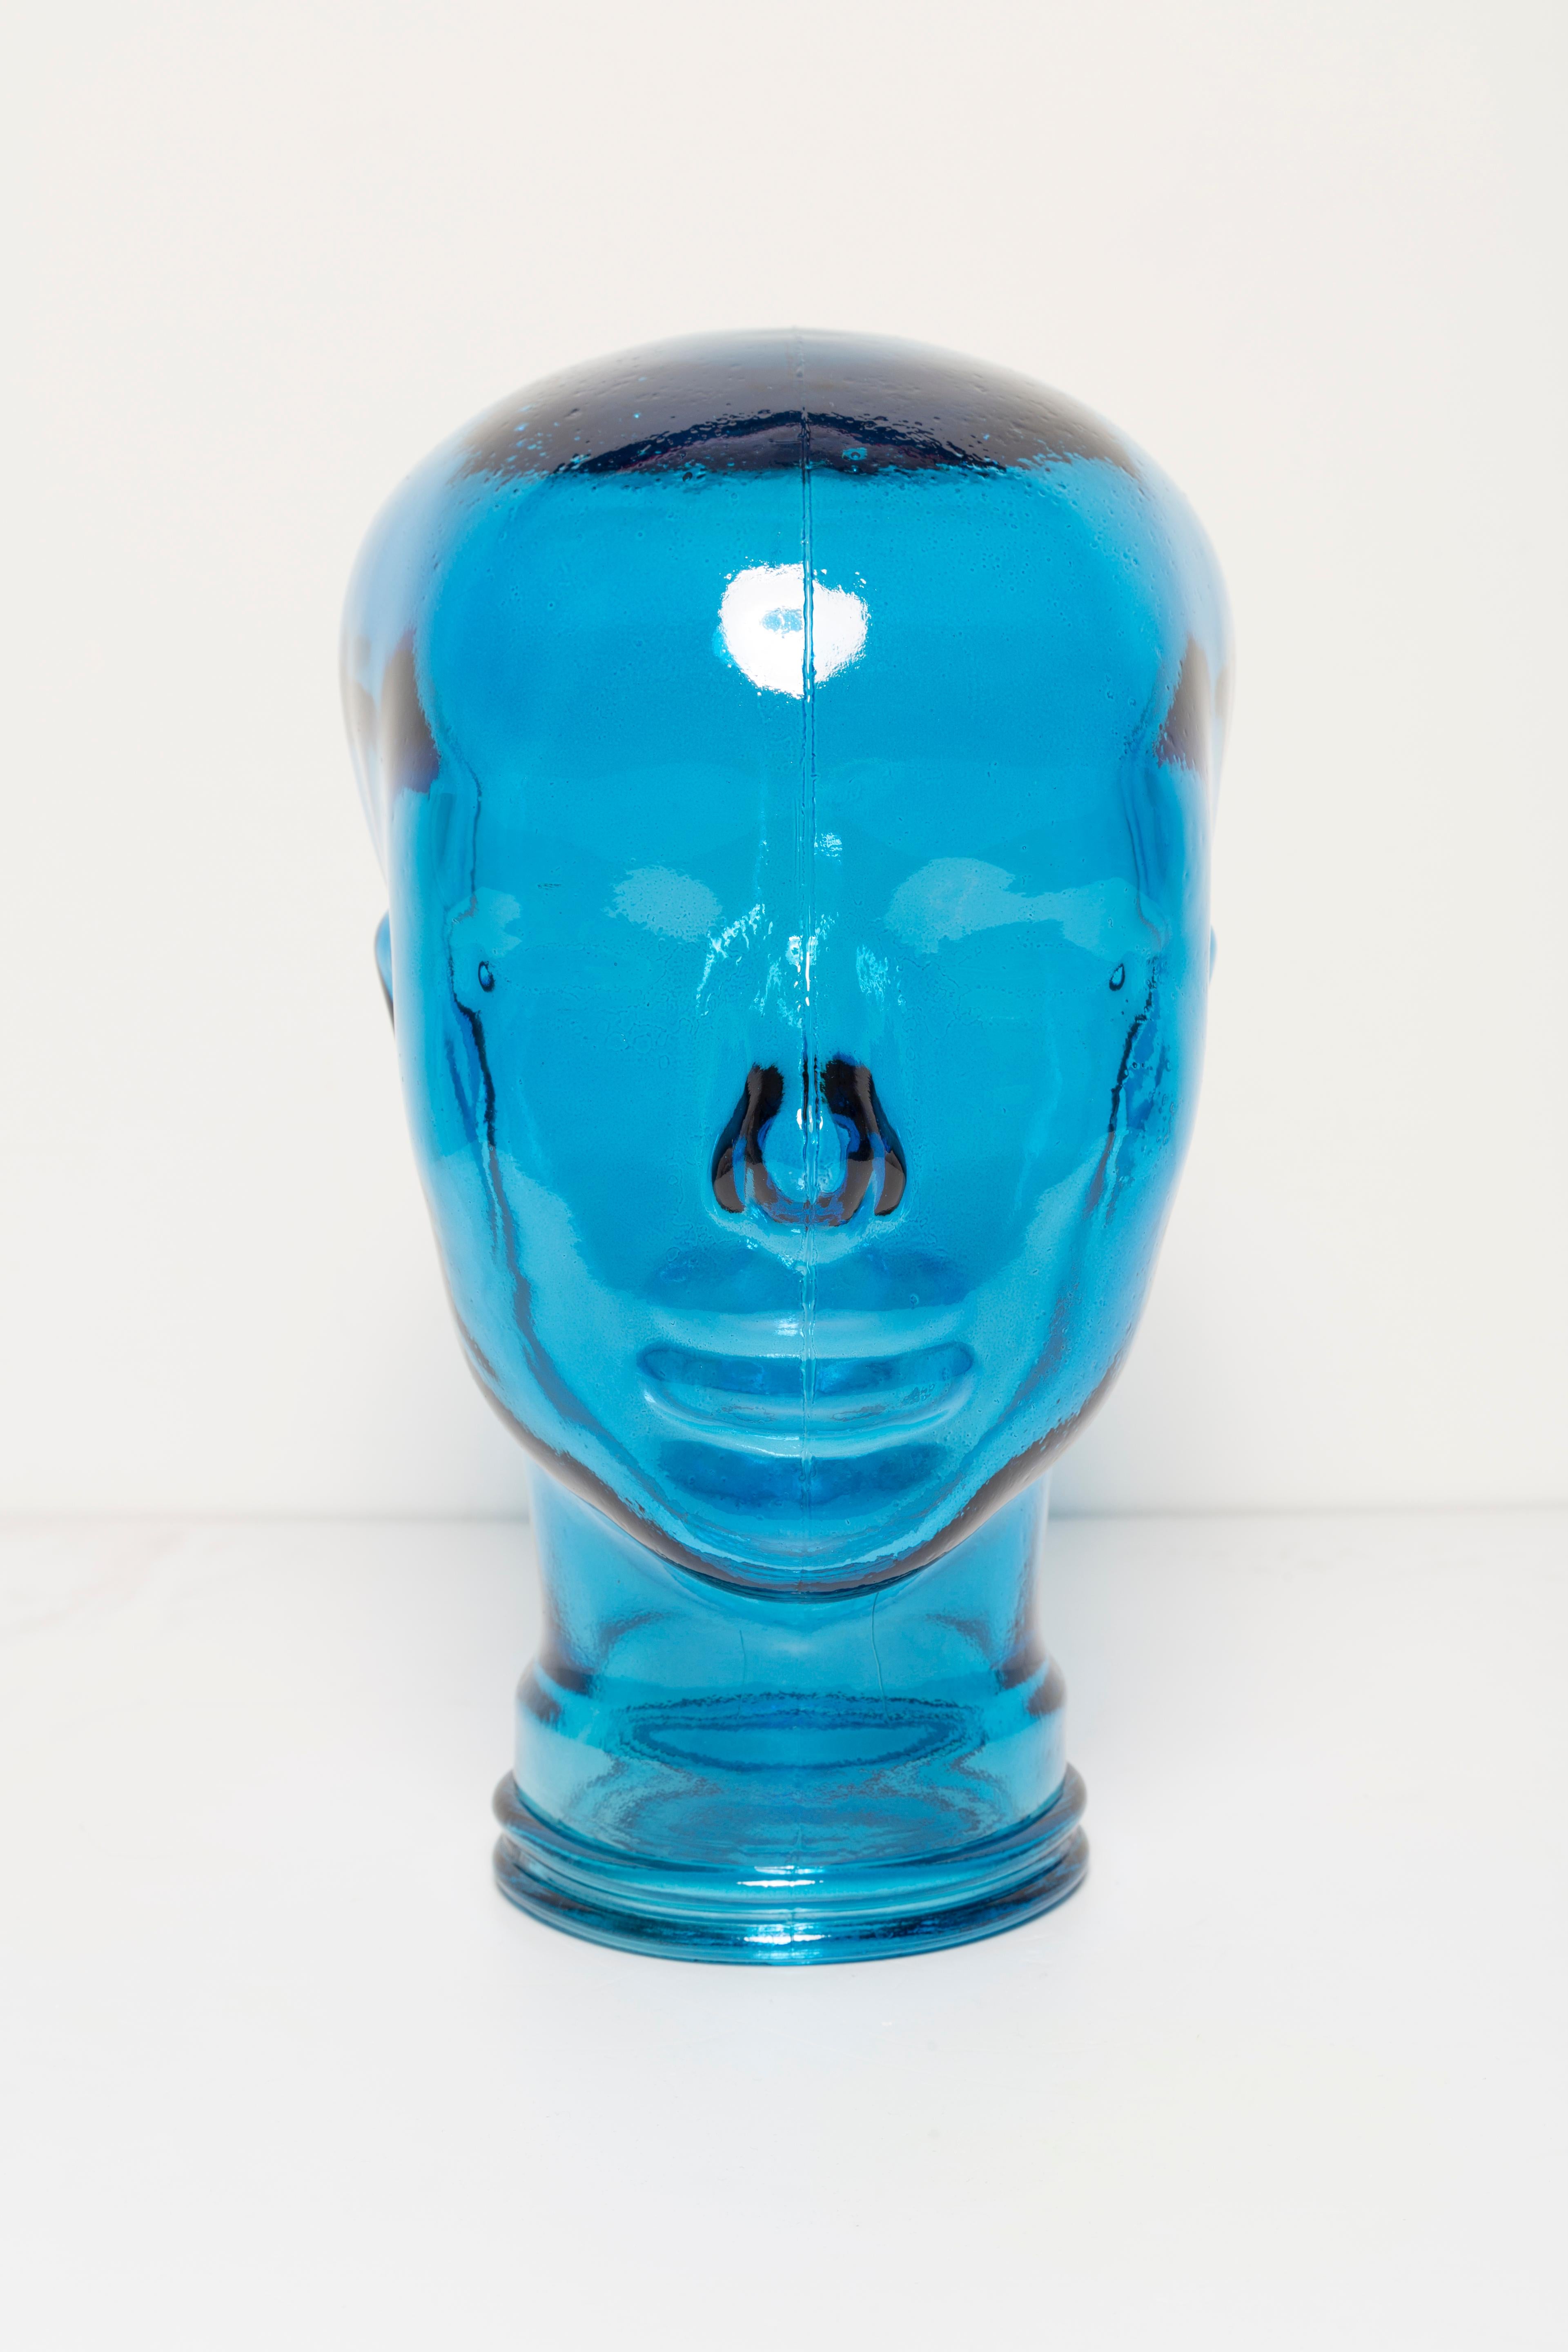 Life-size glass head in a unique blue color. Produced in a German steelworks in the 1970s. Perfect condition. A perfect addition to the interior, photo prop, display or headphone stand.